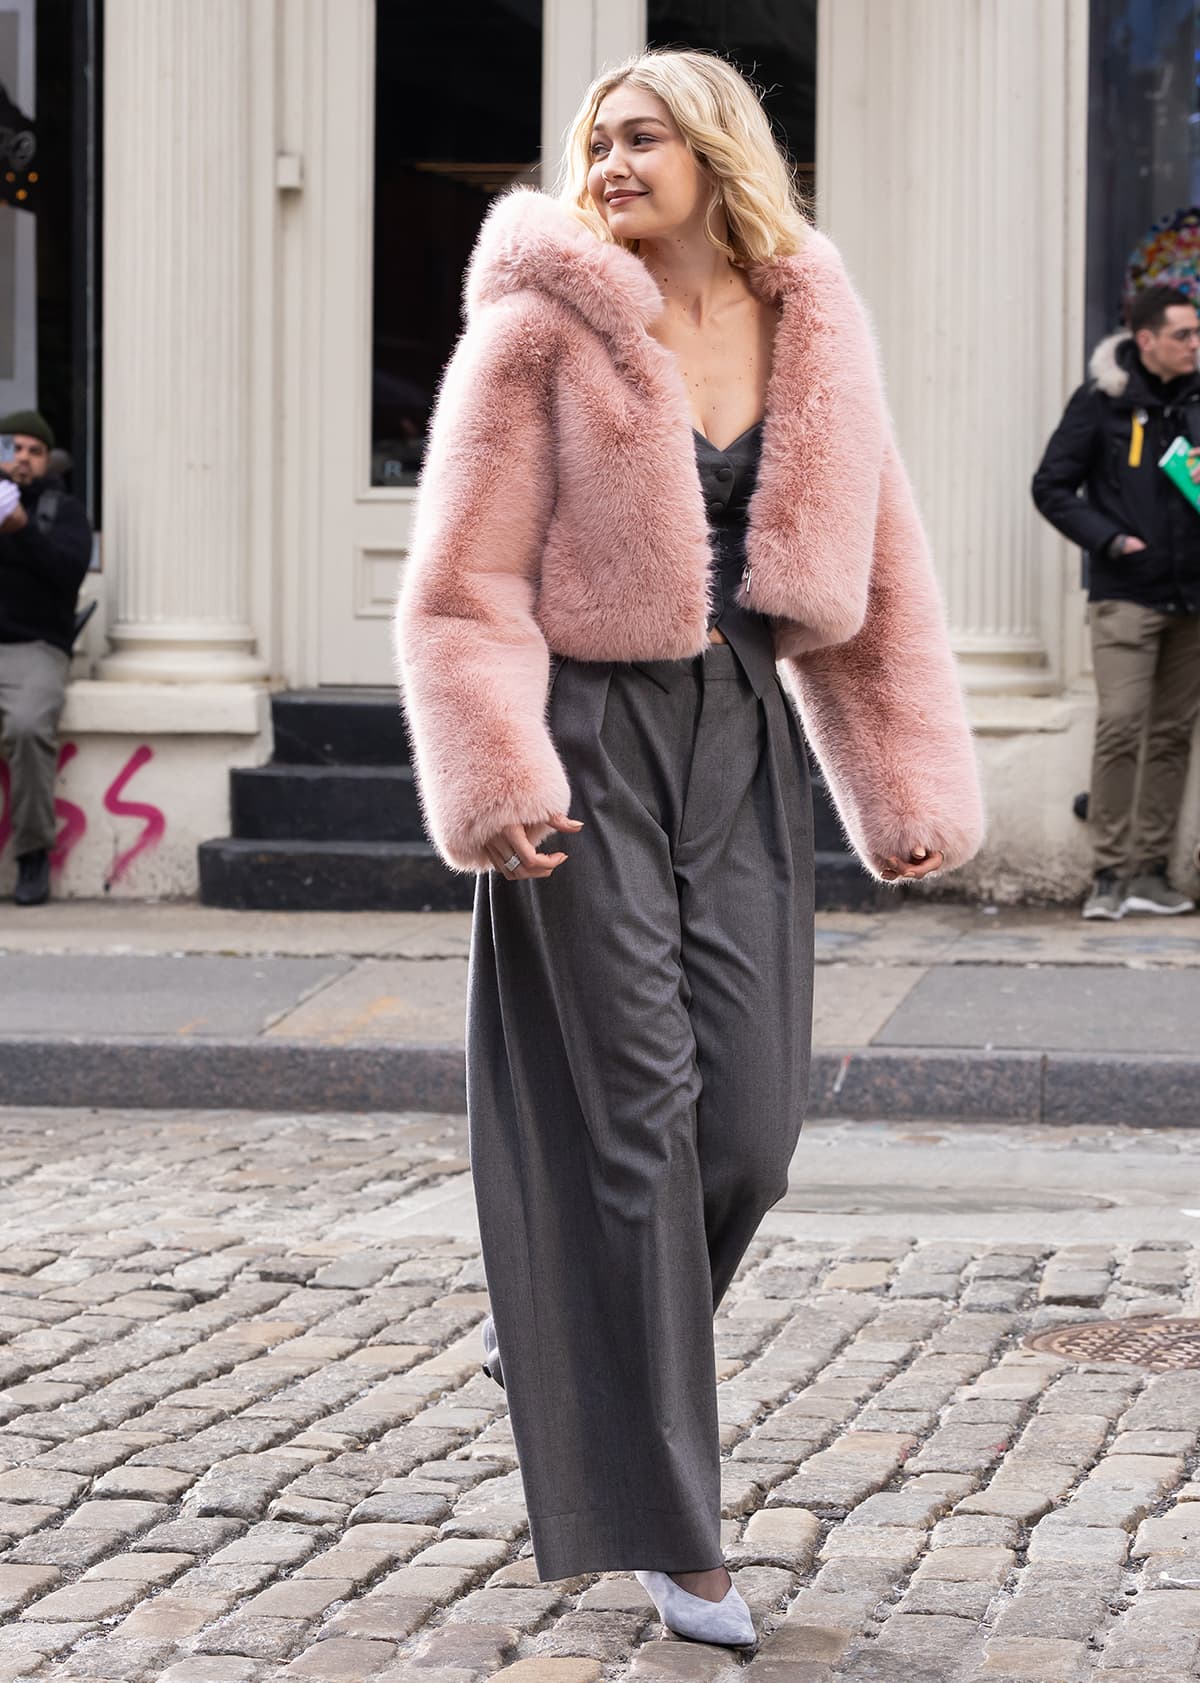 Gigi Hadid swaps her edgy business outfit for a feminine gray-and-pink ensemble with a fuzzy pink hooded jacket and a gray vest suit for her Maybelline commercial